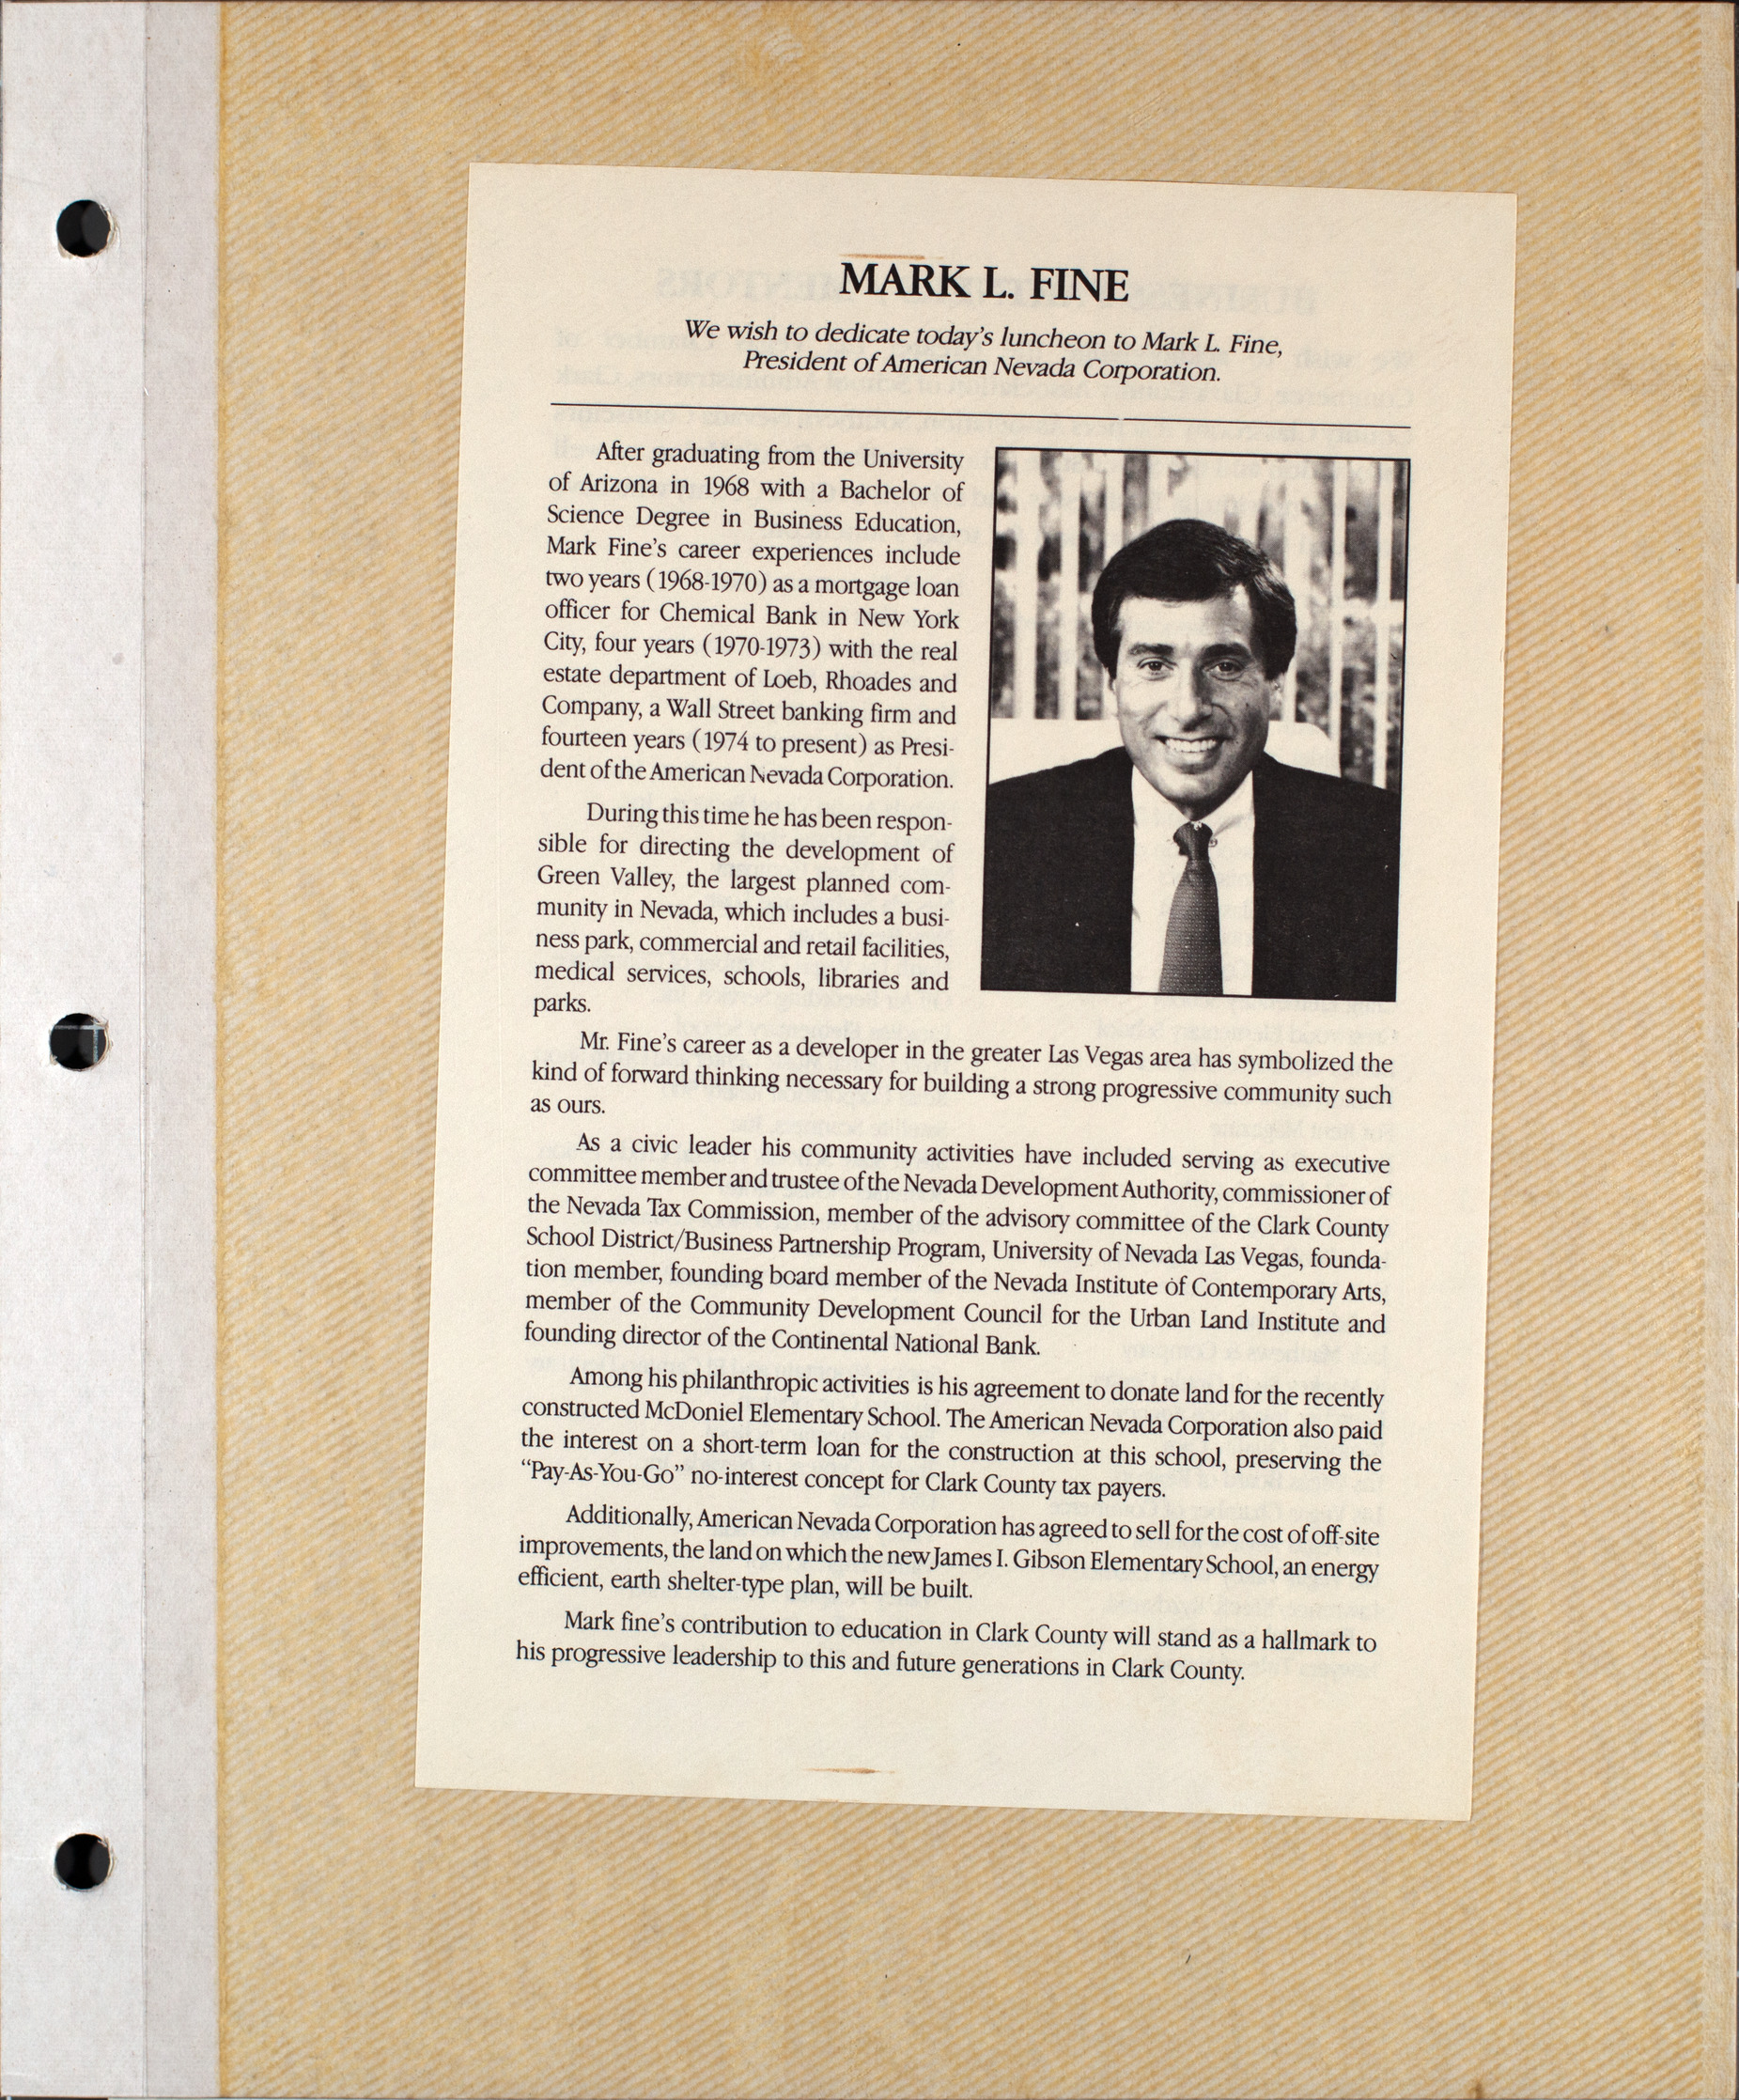 Biography of Mark Fine from the Clark County School District new teacher welcome luncheon, August 22, 1988